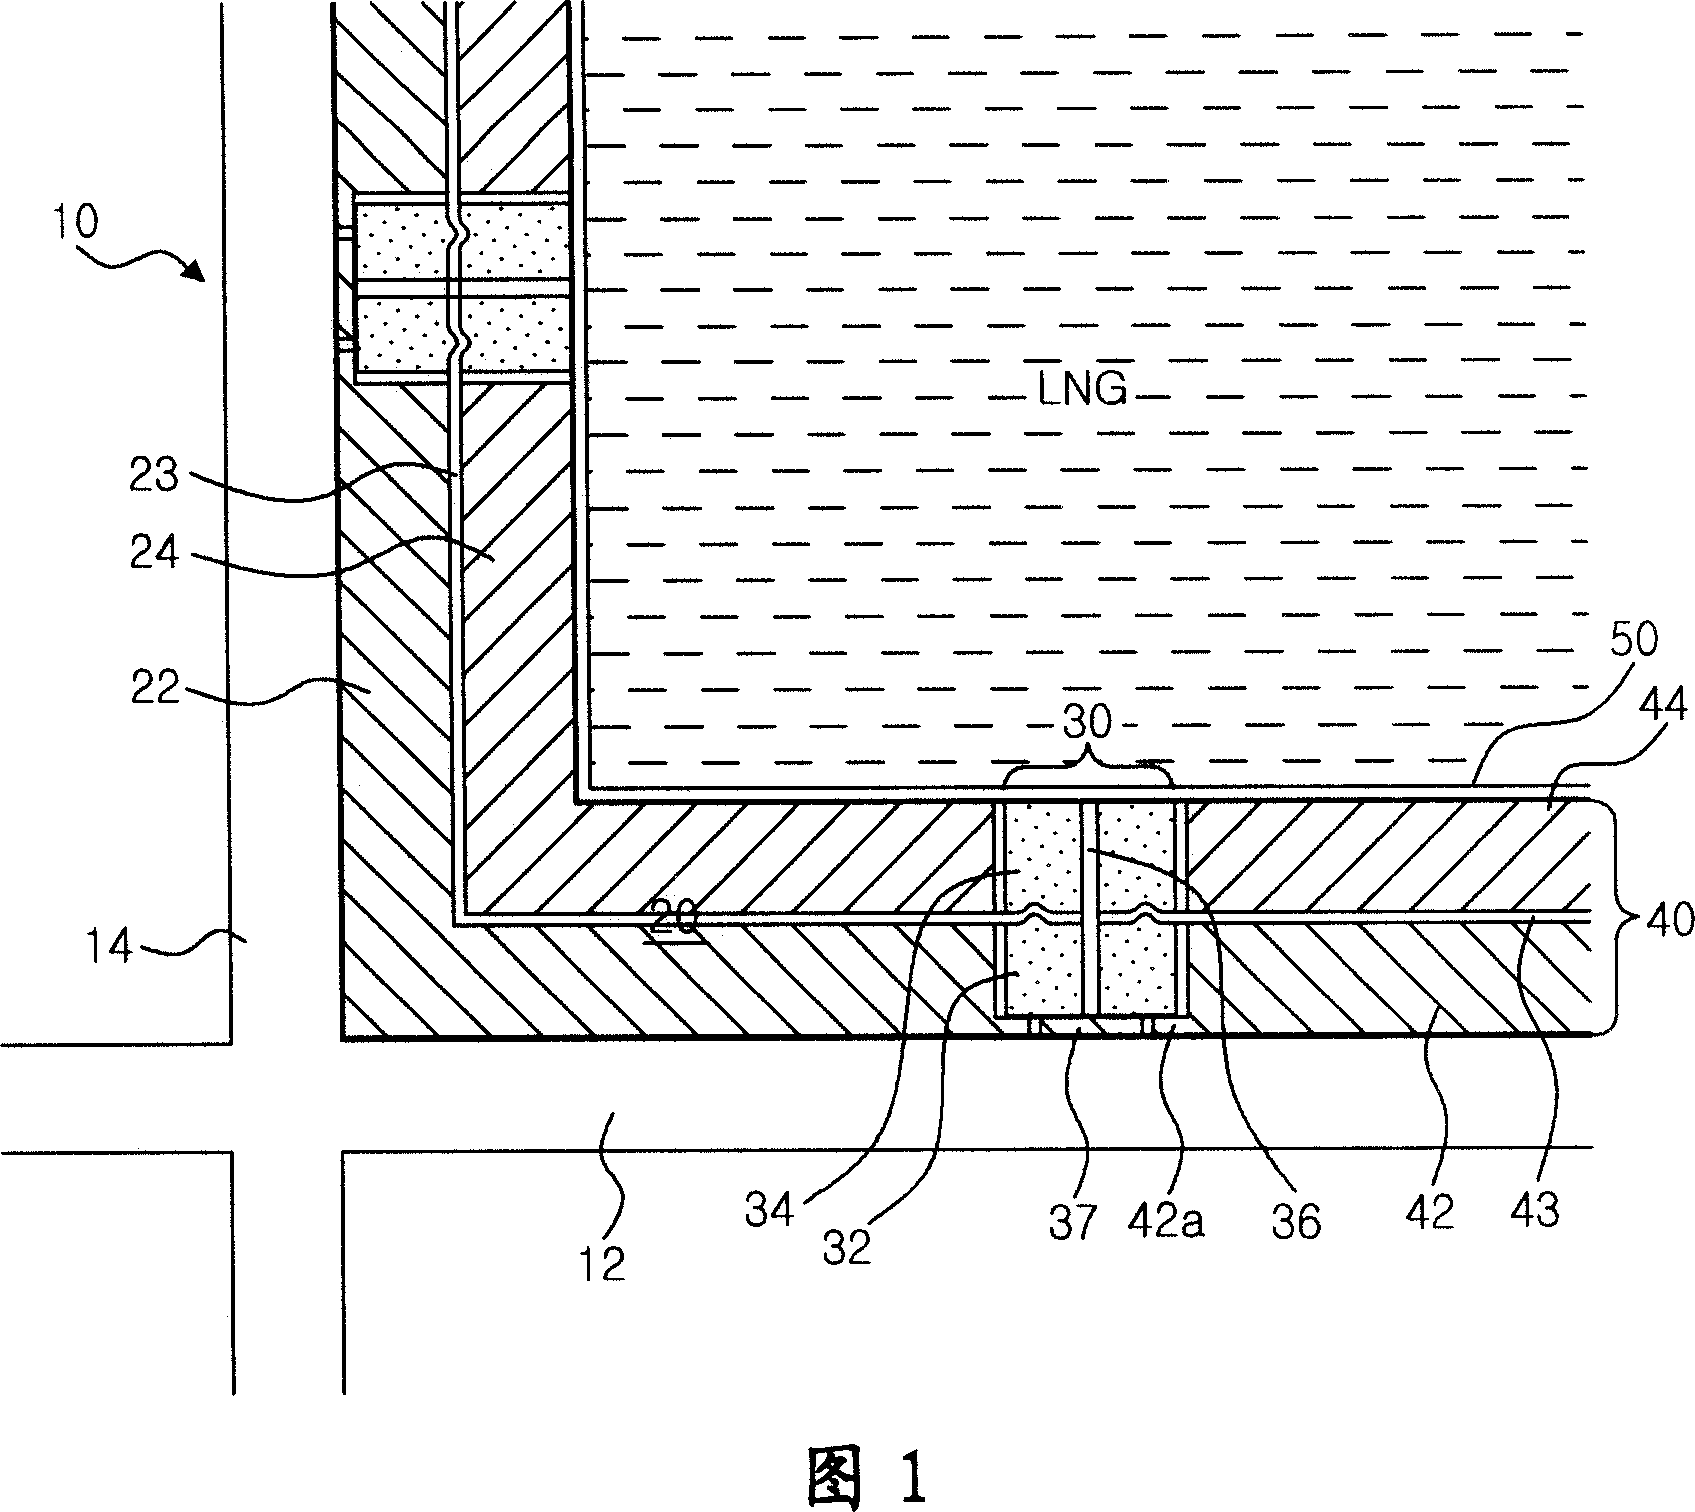 Liquefied natural gas storage tank having improved insulation structure and method of manufacturing the same